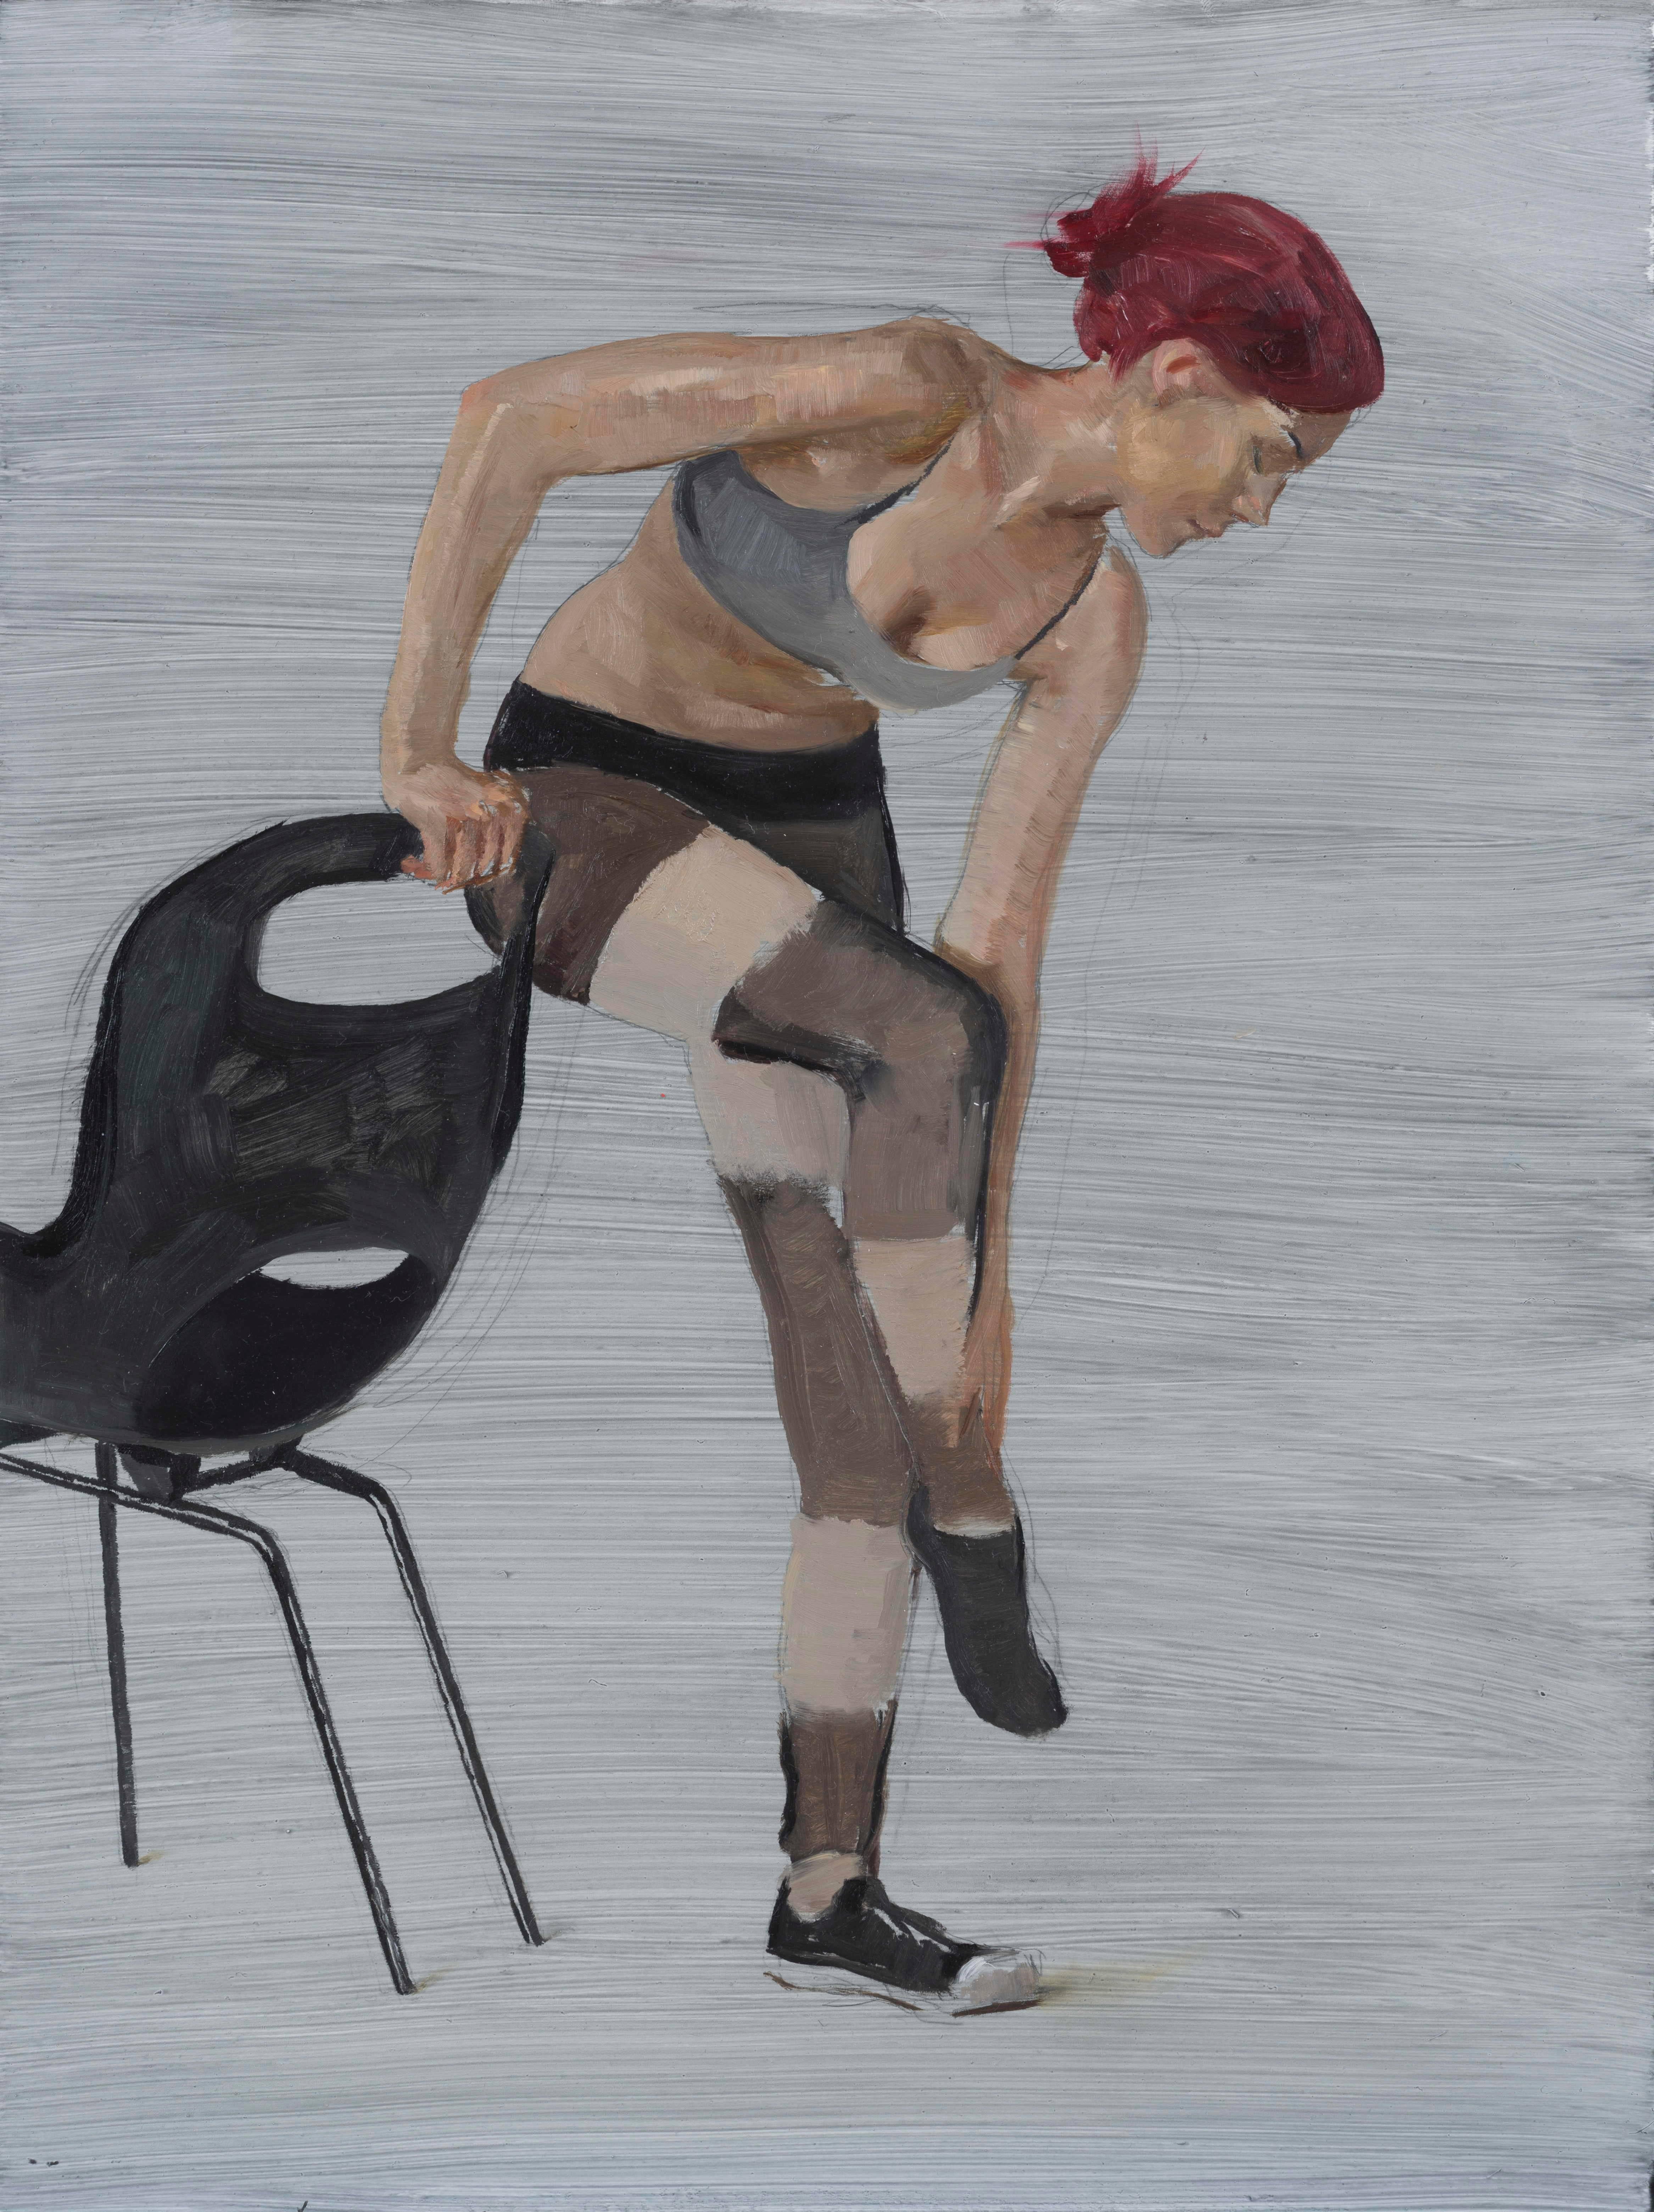 Courtney Standing on One Foot, (study for Motion Capture 6) - Original Oil Paint